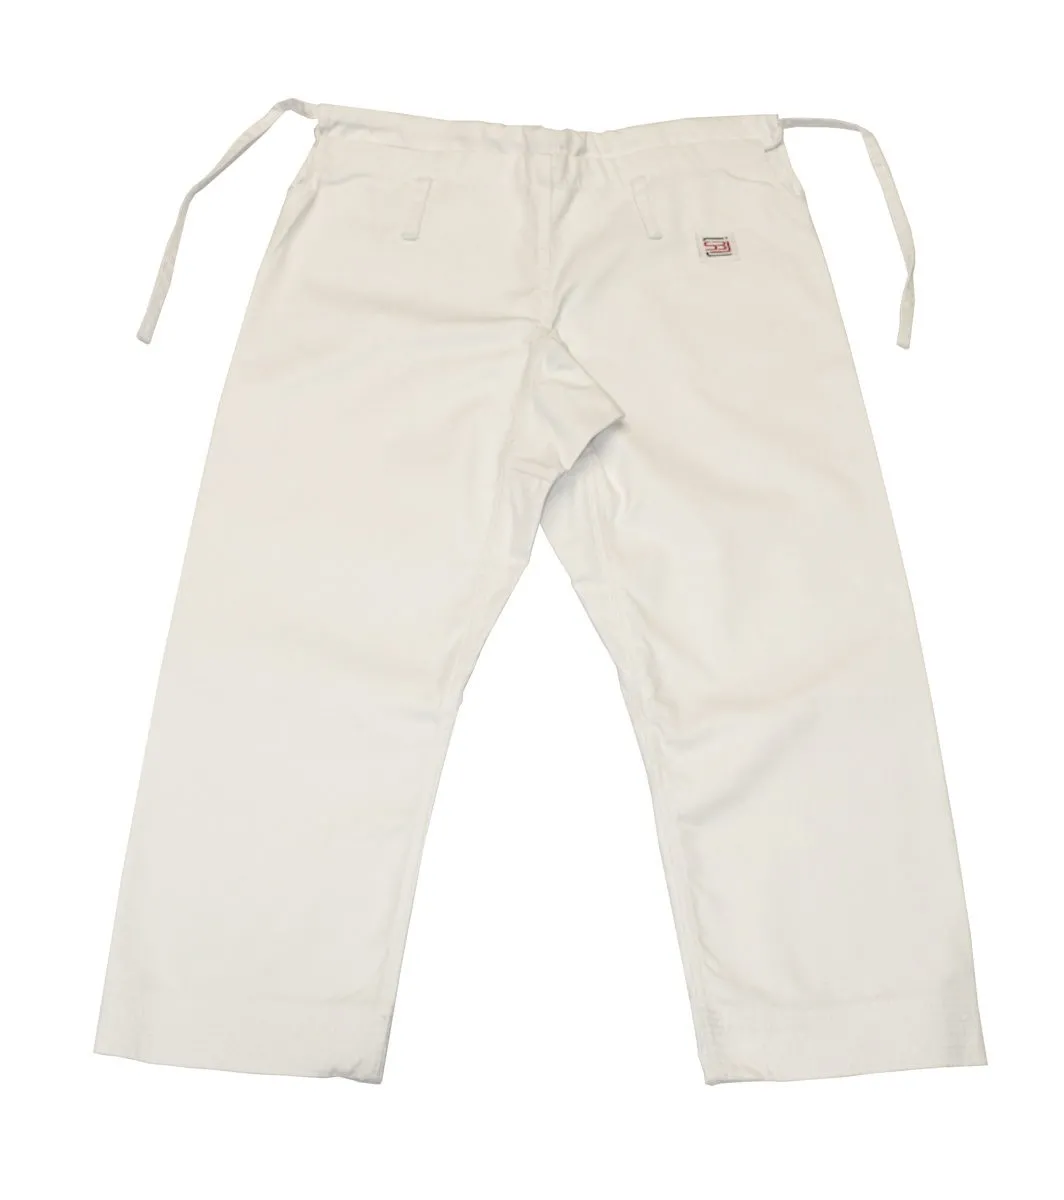 heavy trousers white with drawstring waistband 12 OZ